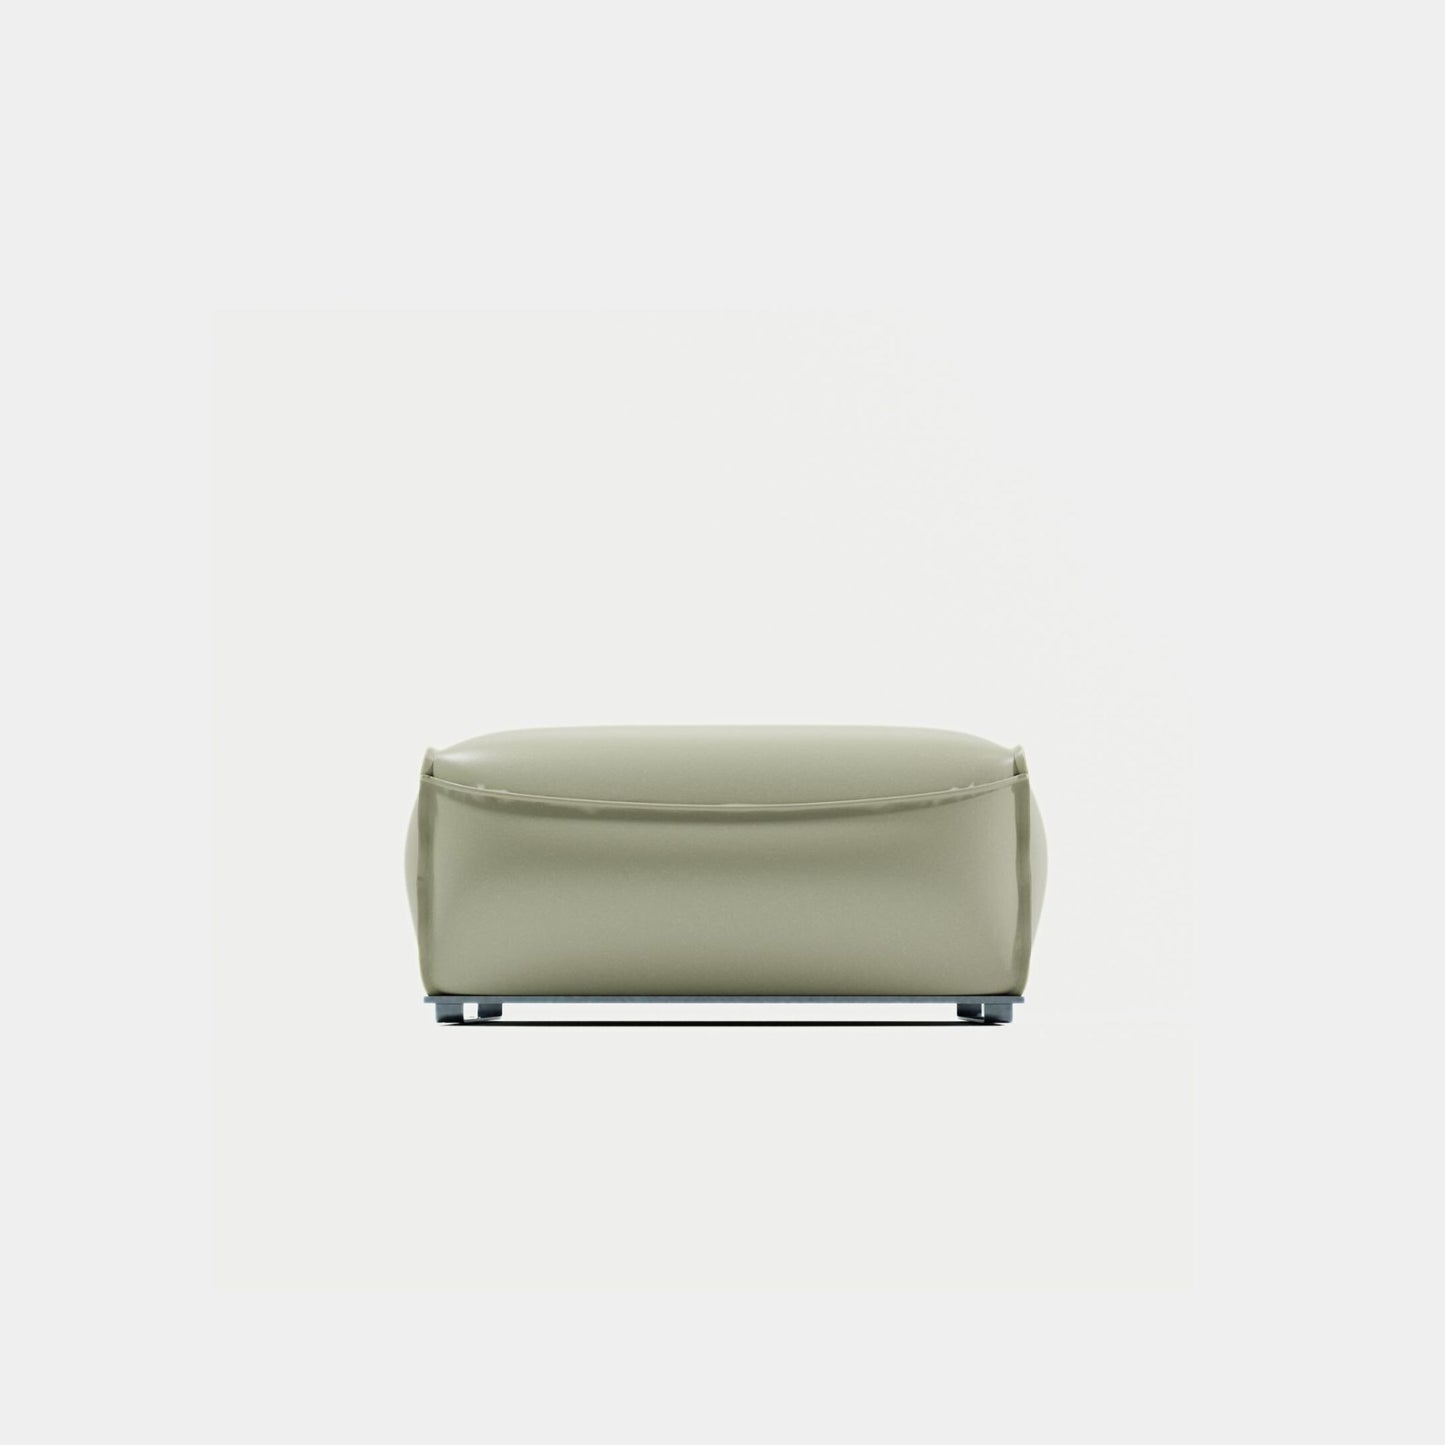 Colby leather ottoman white